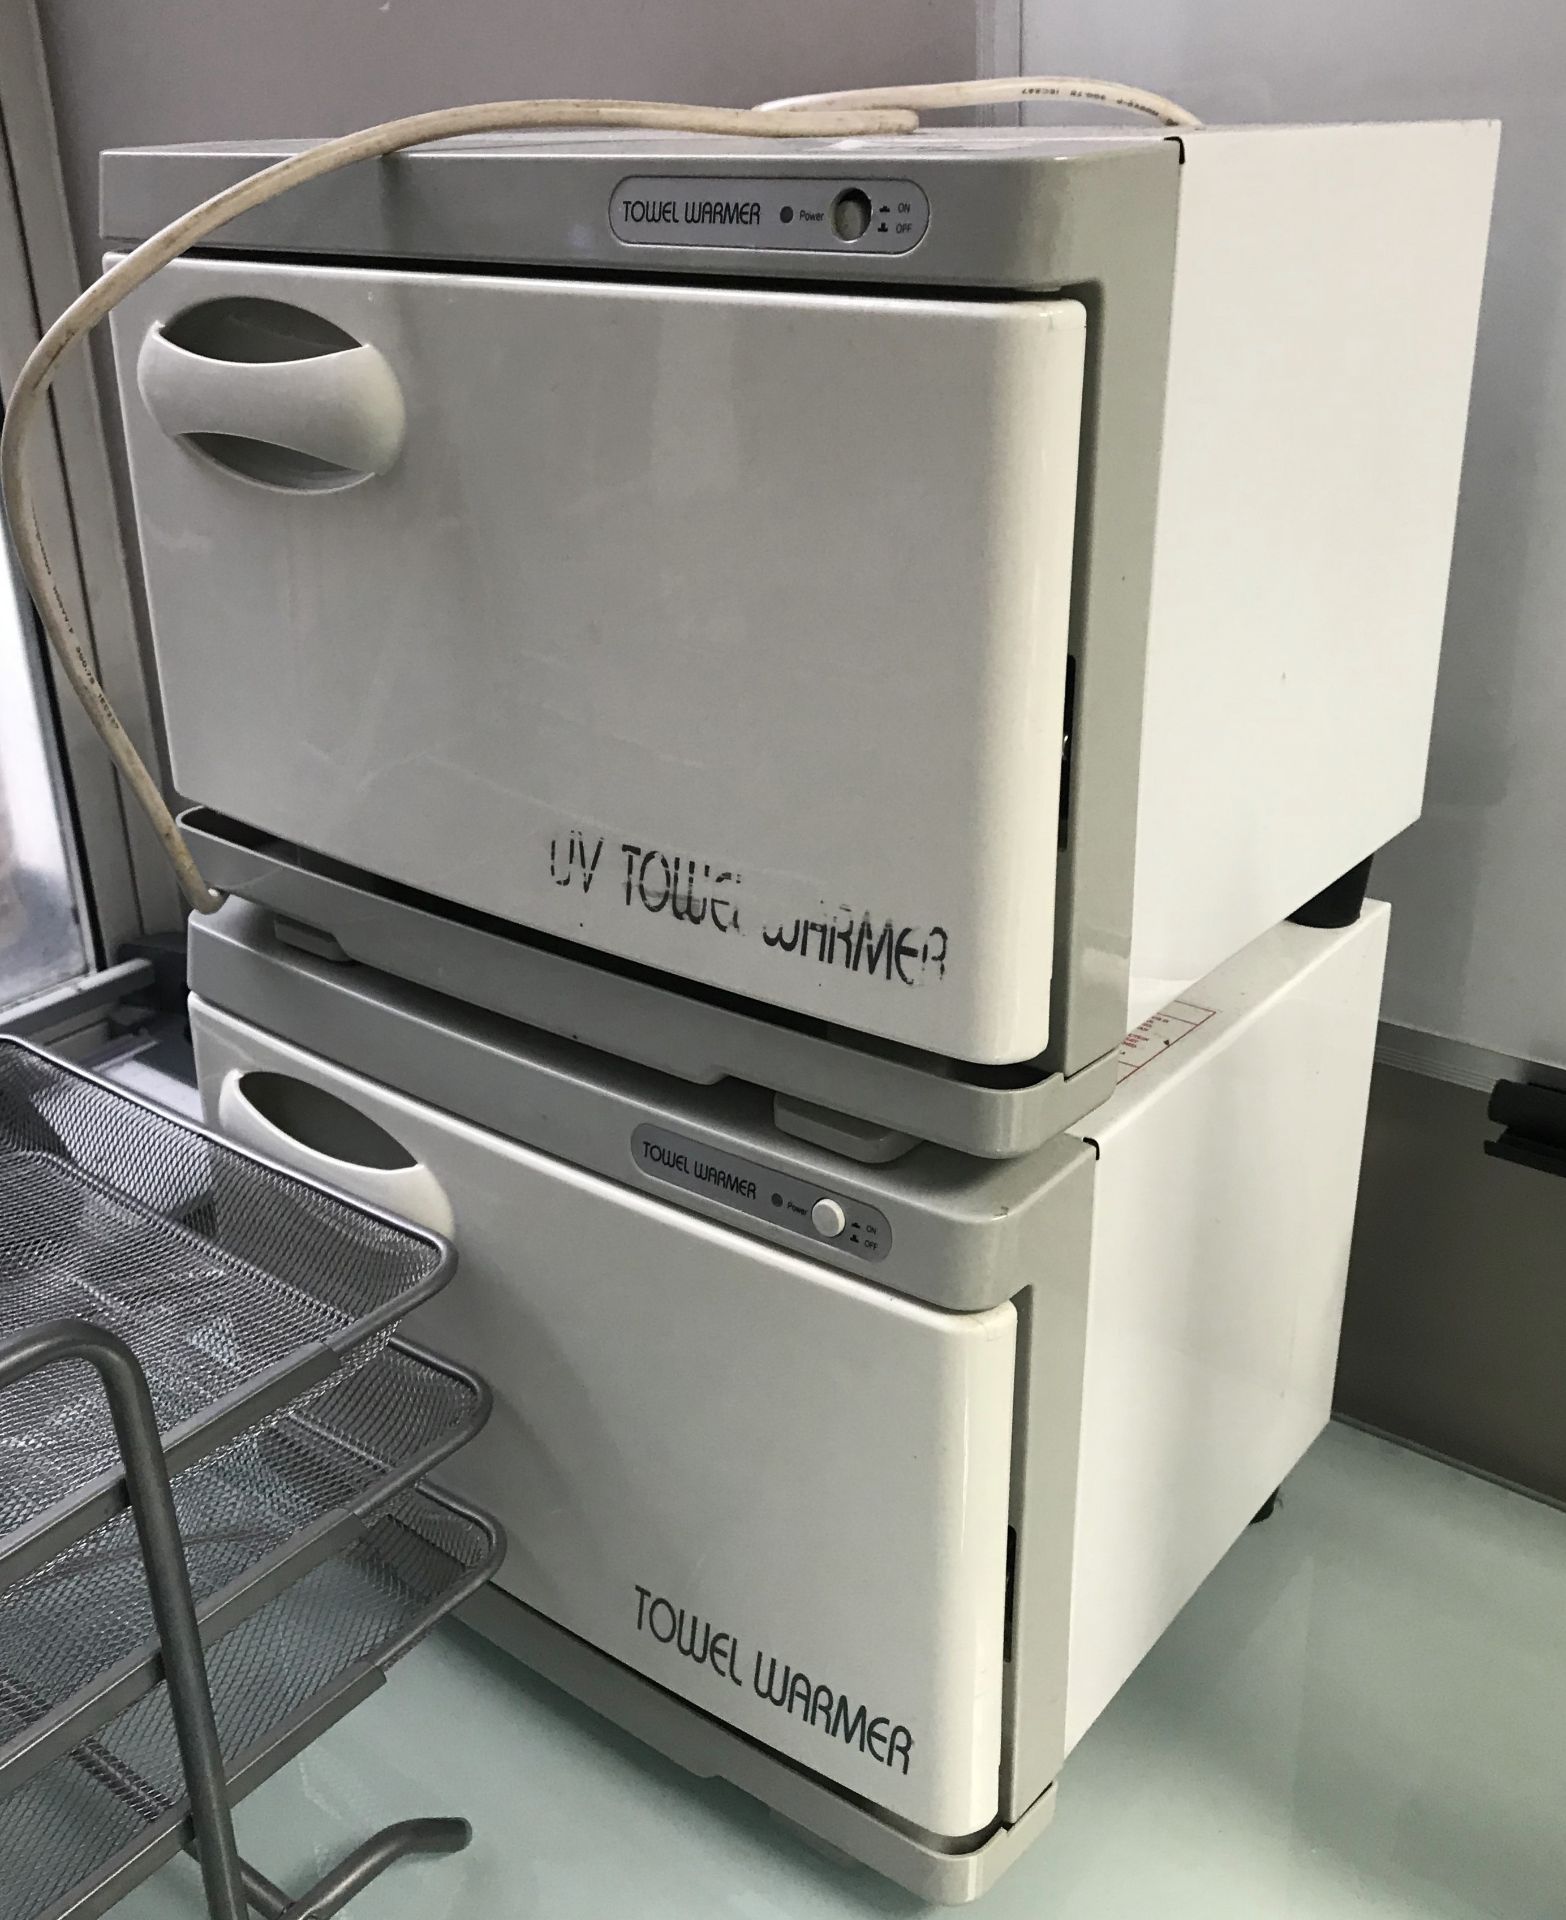 2 x Countertop Towel Warmers - 240v - Ref H180 - CL587 - Location: London WC2H